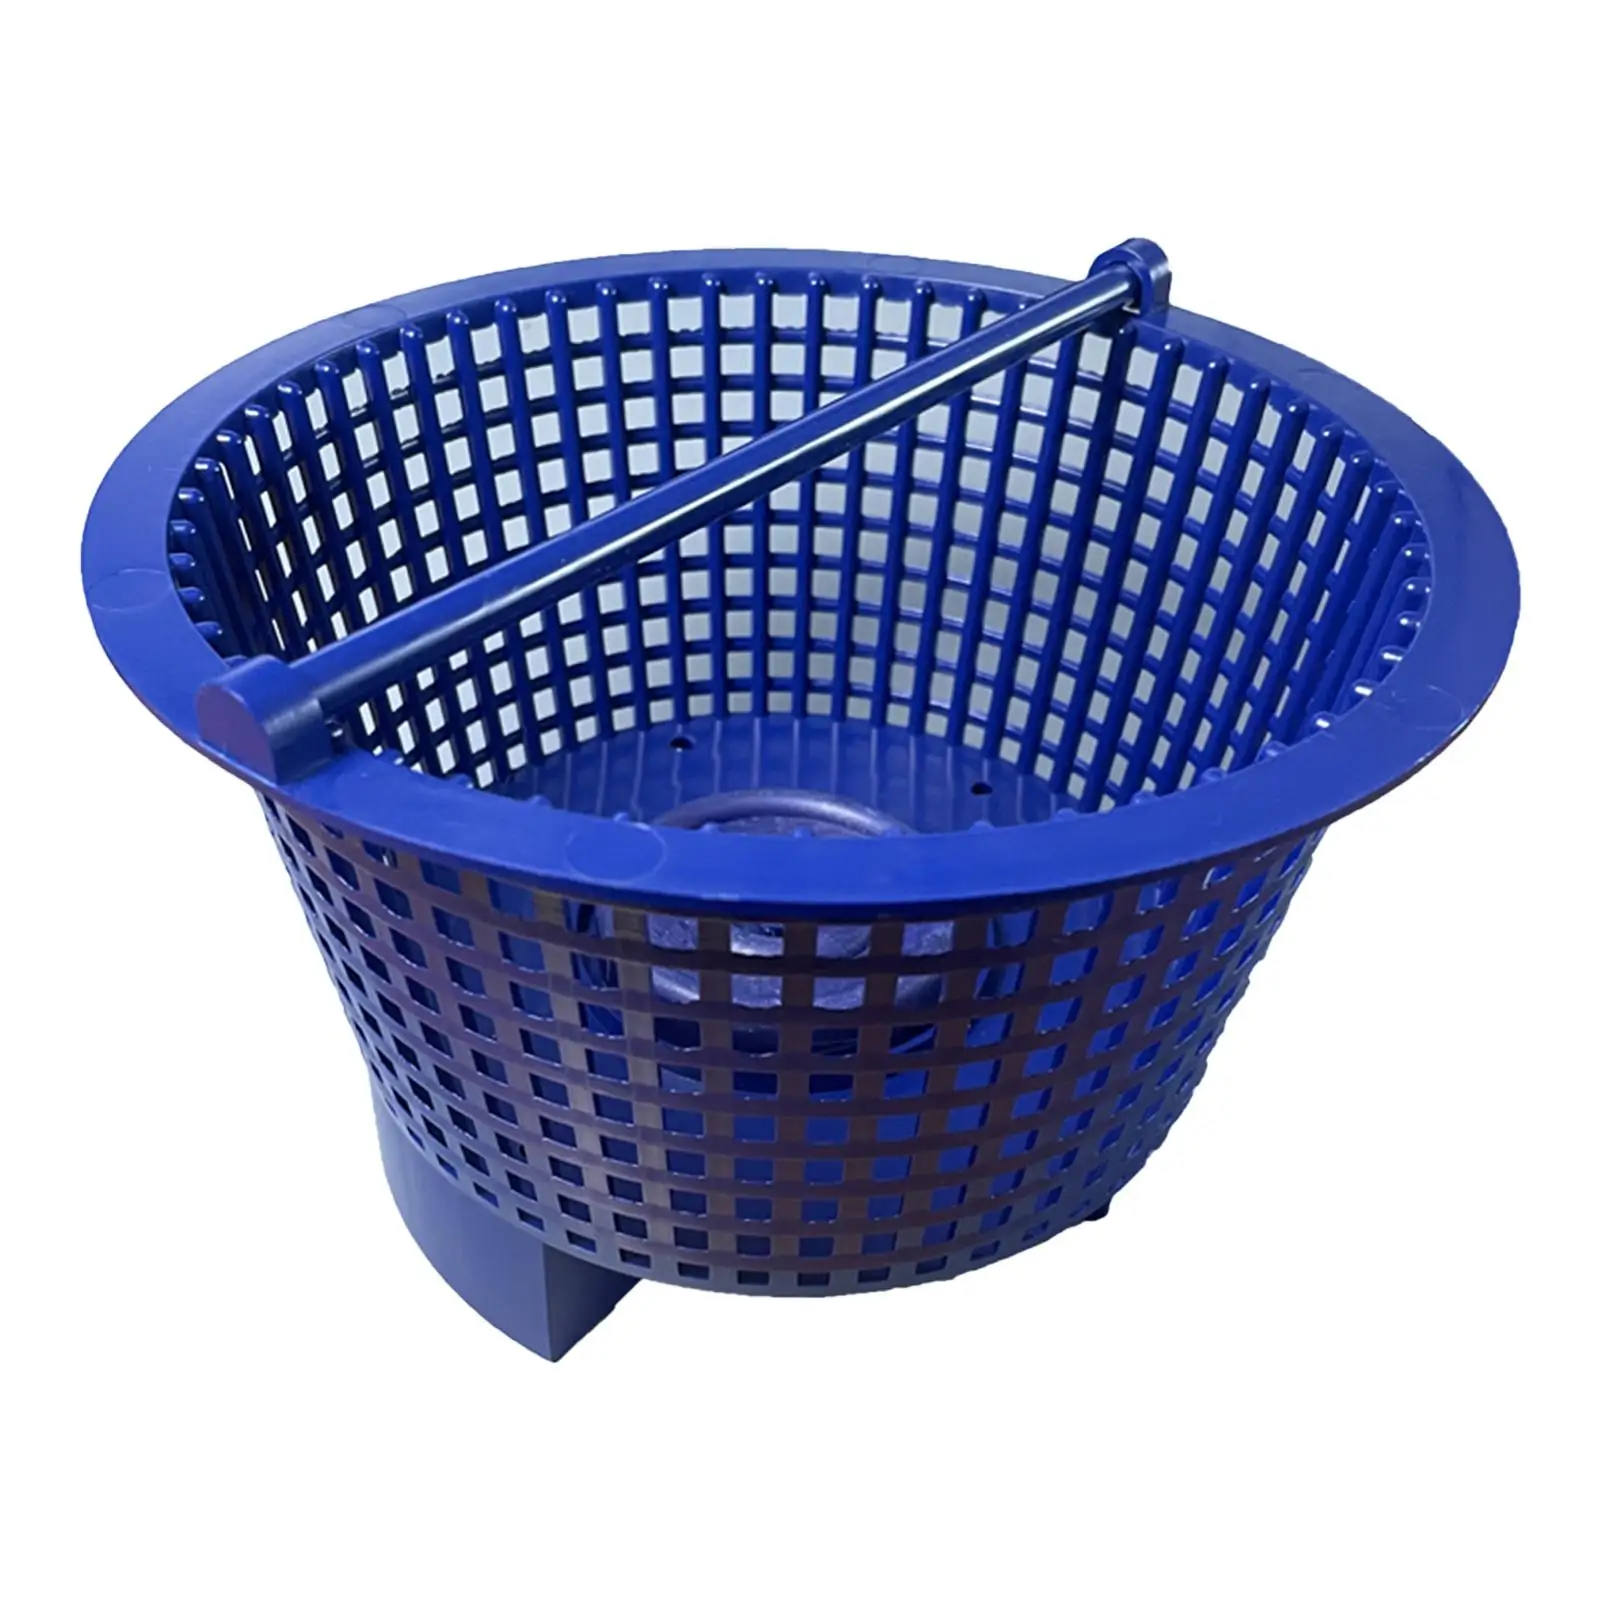 

Pool Skimmer Basket Cleaning Tool Effective Accessories with Handle Pool Filter Basket for Cleaning Grass Debris in Ground Pool